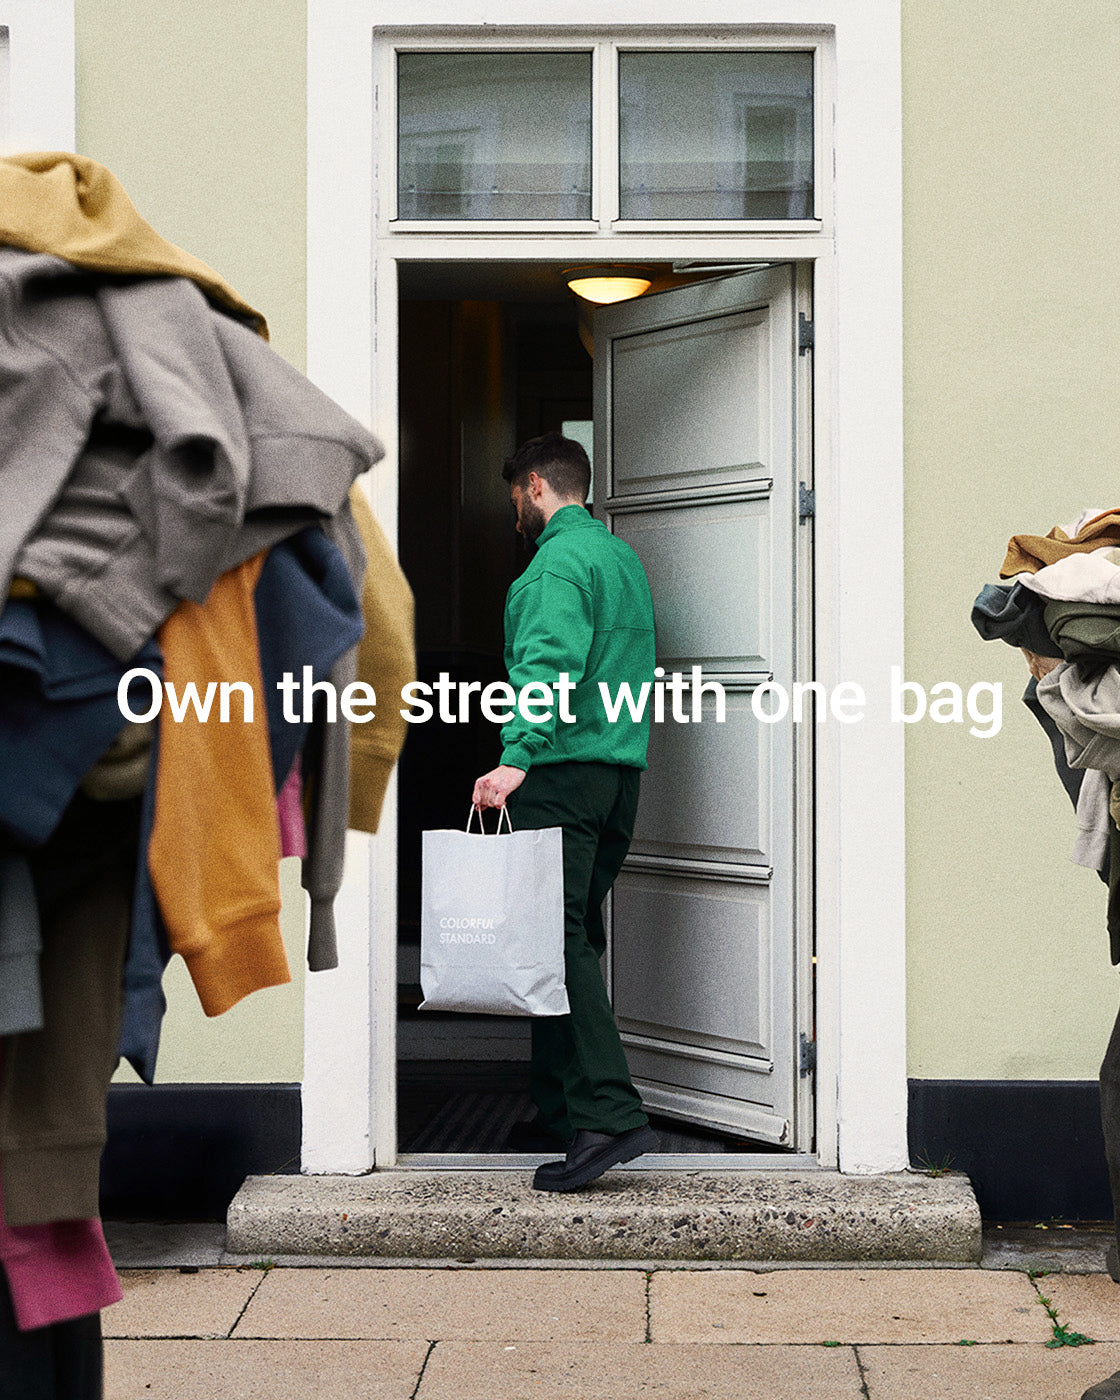 Own_the_street_with_one_bag_mobile_2ab30be1-989e-4aa0-a3c0-37a2b2971252